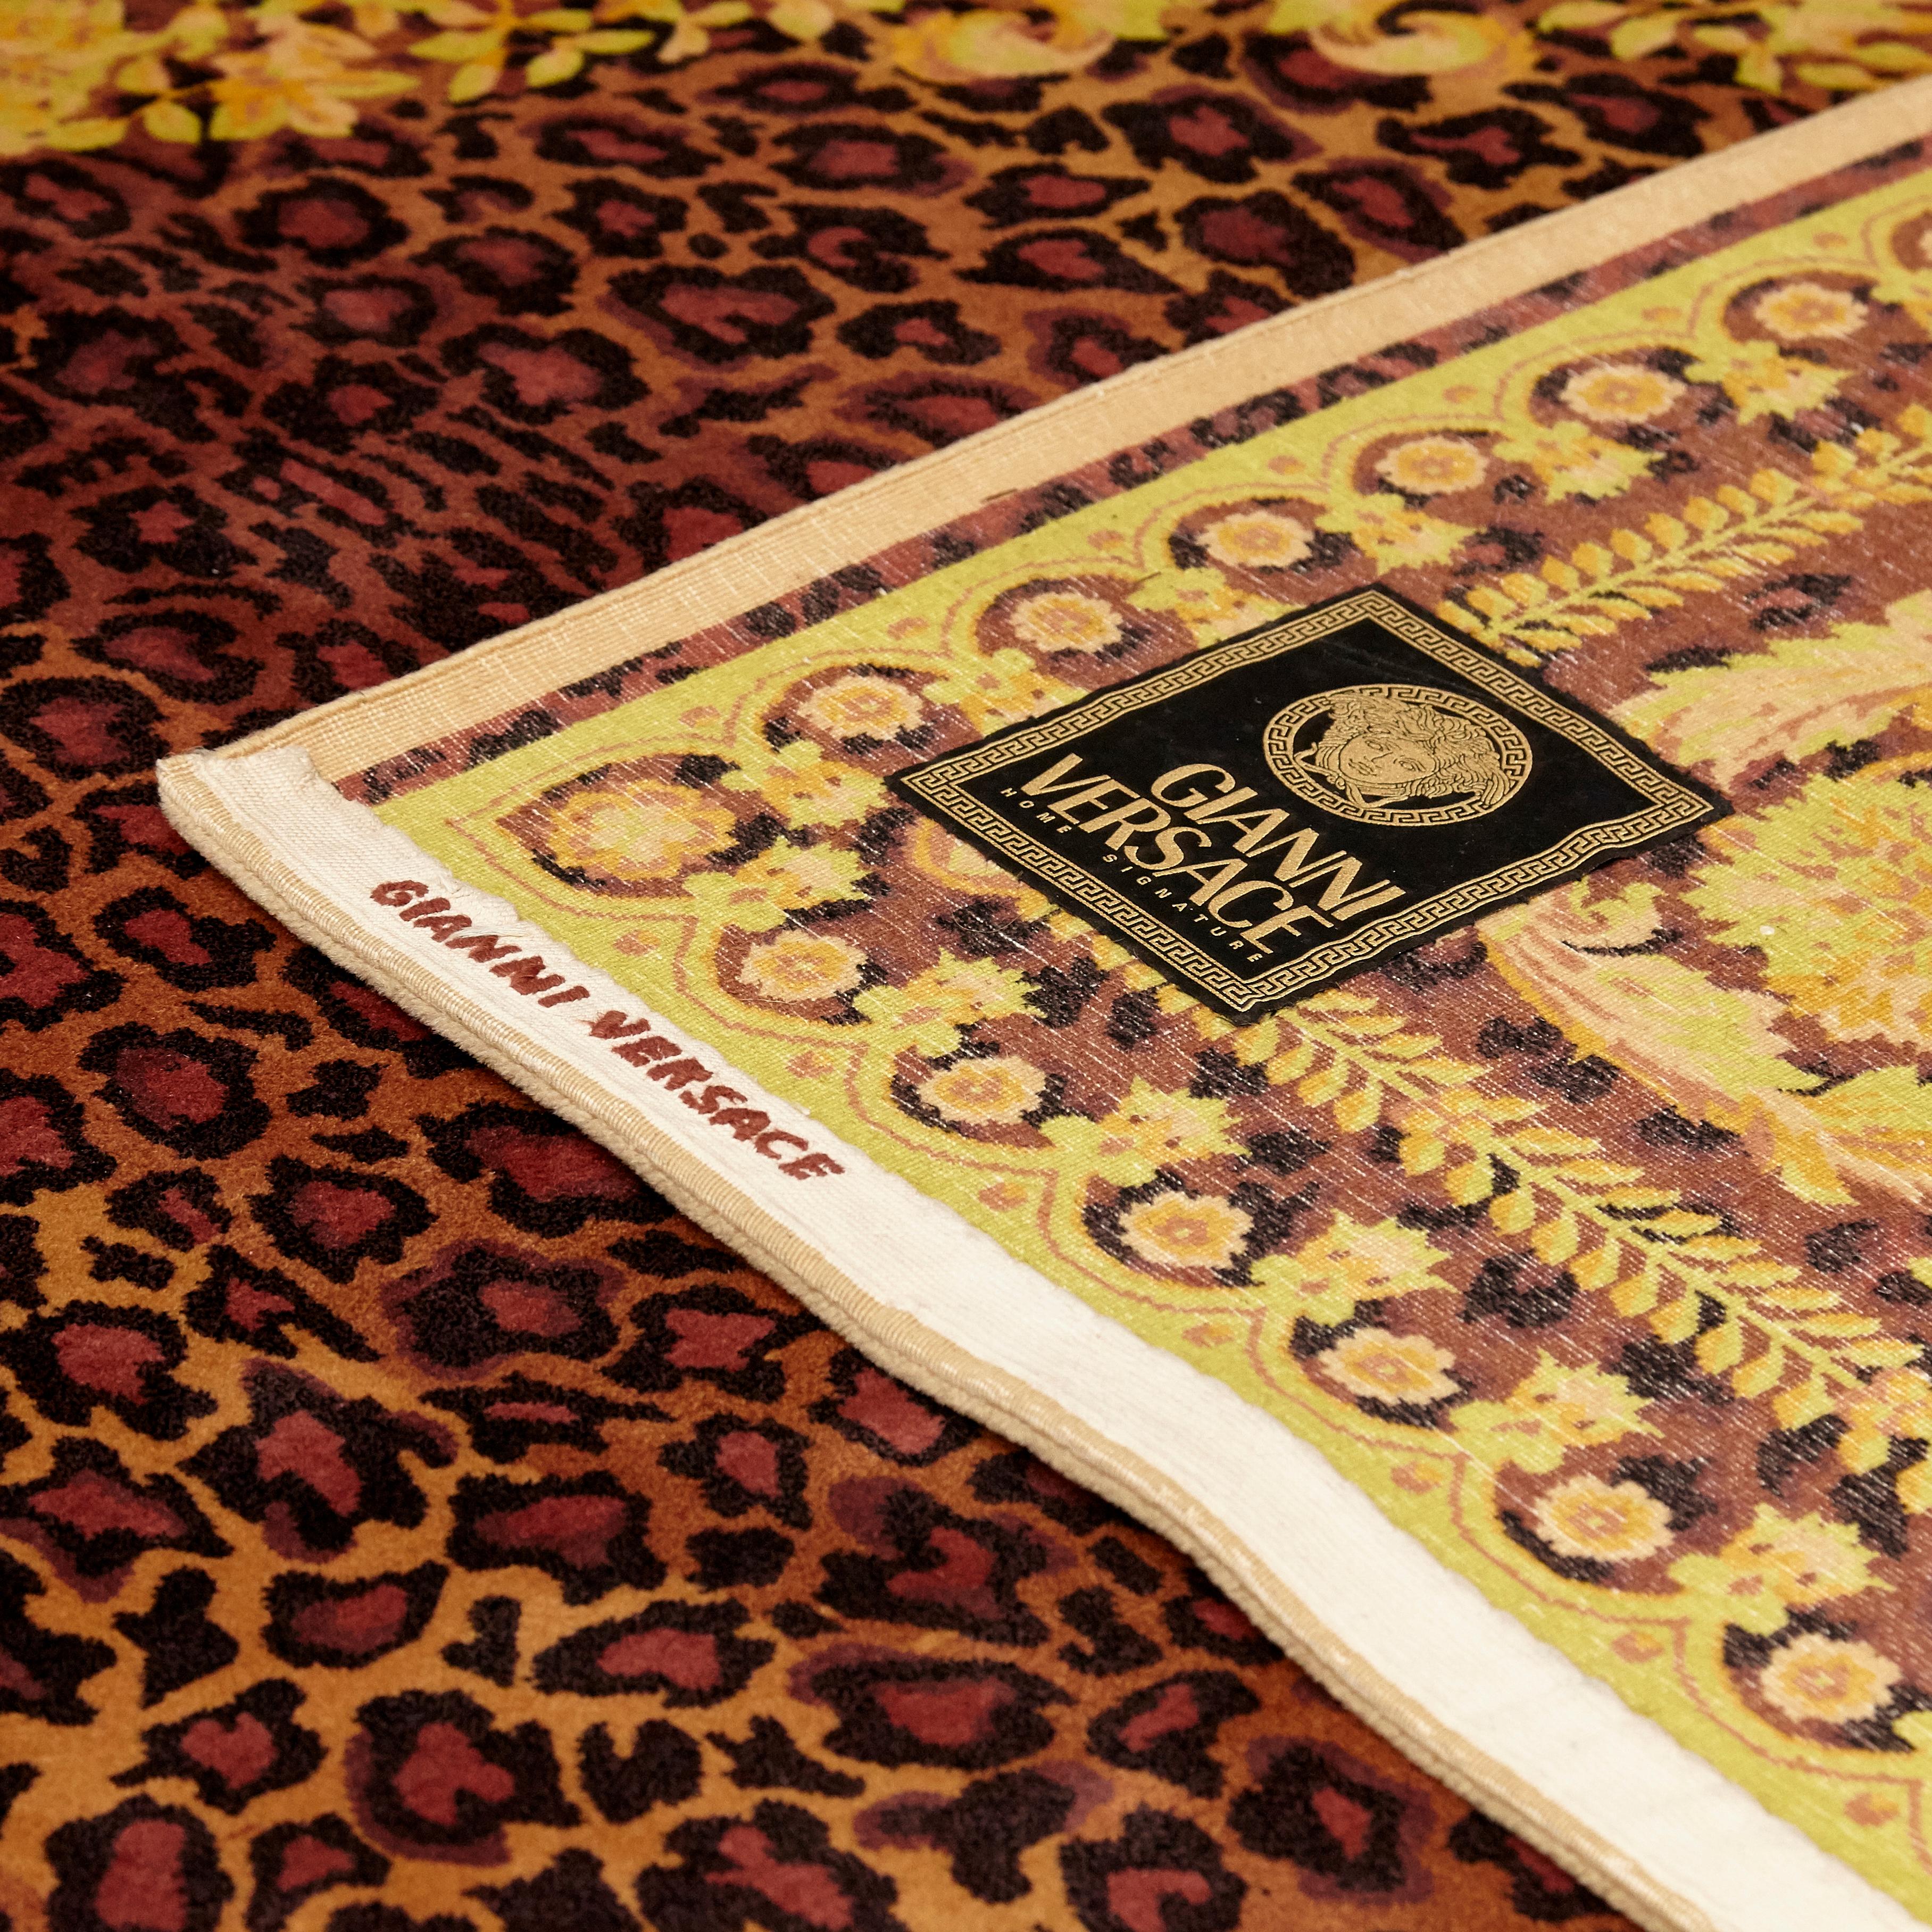 Gianni Versace Collection Rug Wild Barocco, Gold Leopard Animal Print, 1980 8